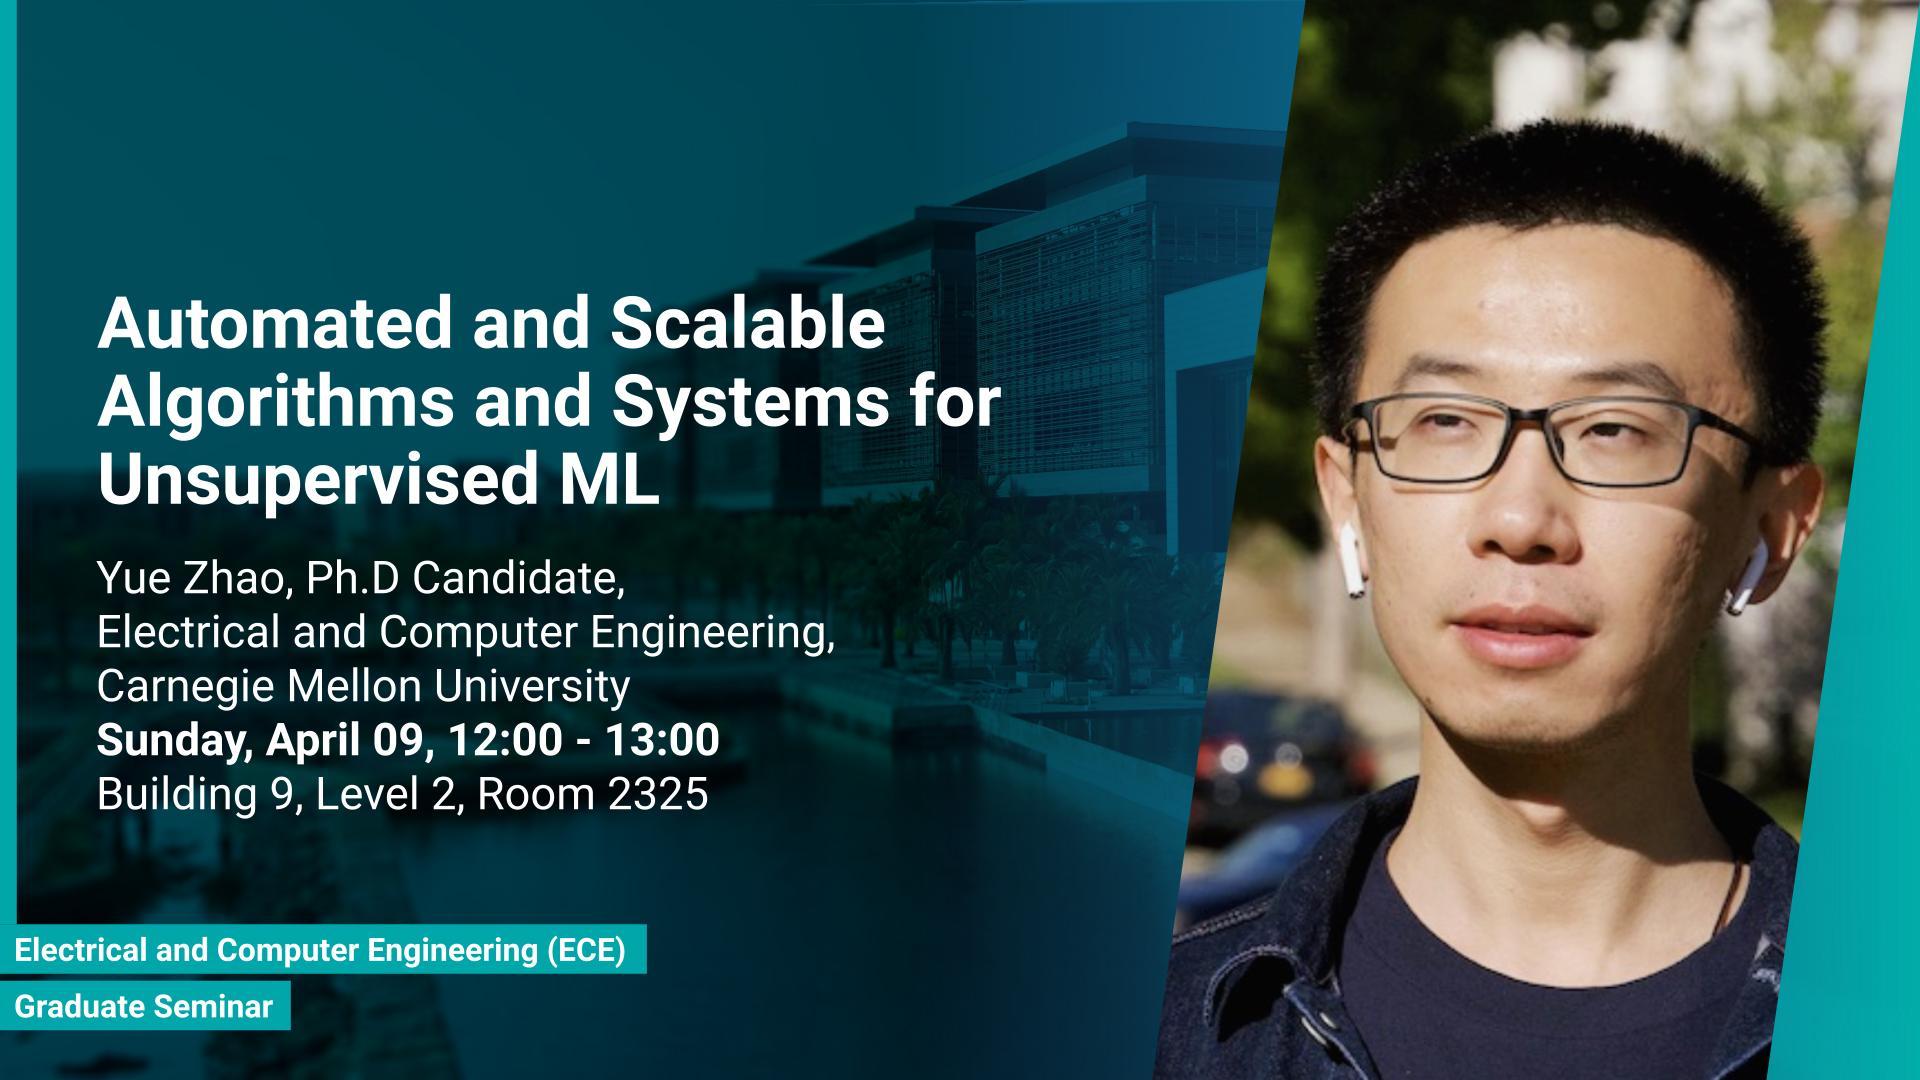 KAUST CEMSE ECE Graduate Seminar Yue Zhao Automated and Scalable Algorithms and Systems for Unsupervised ML